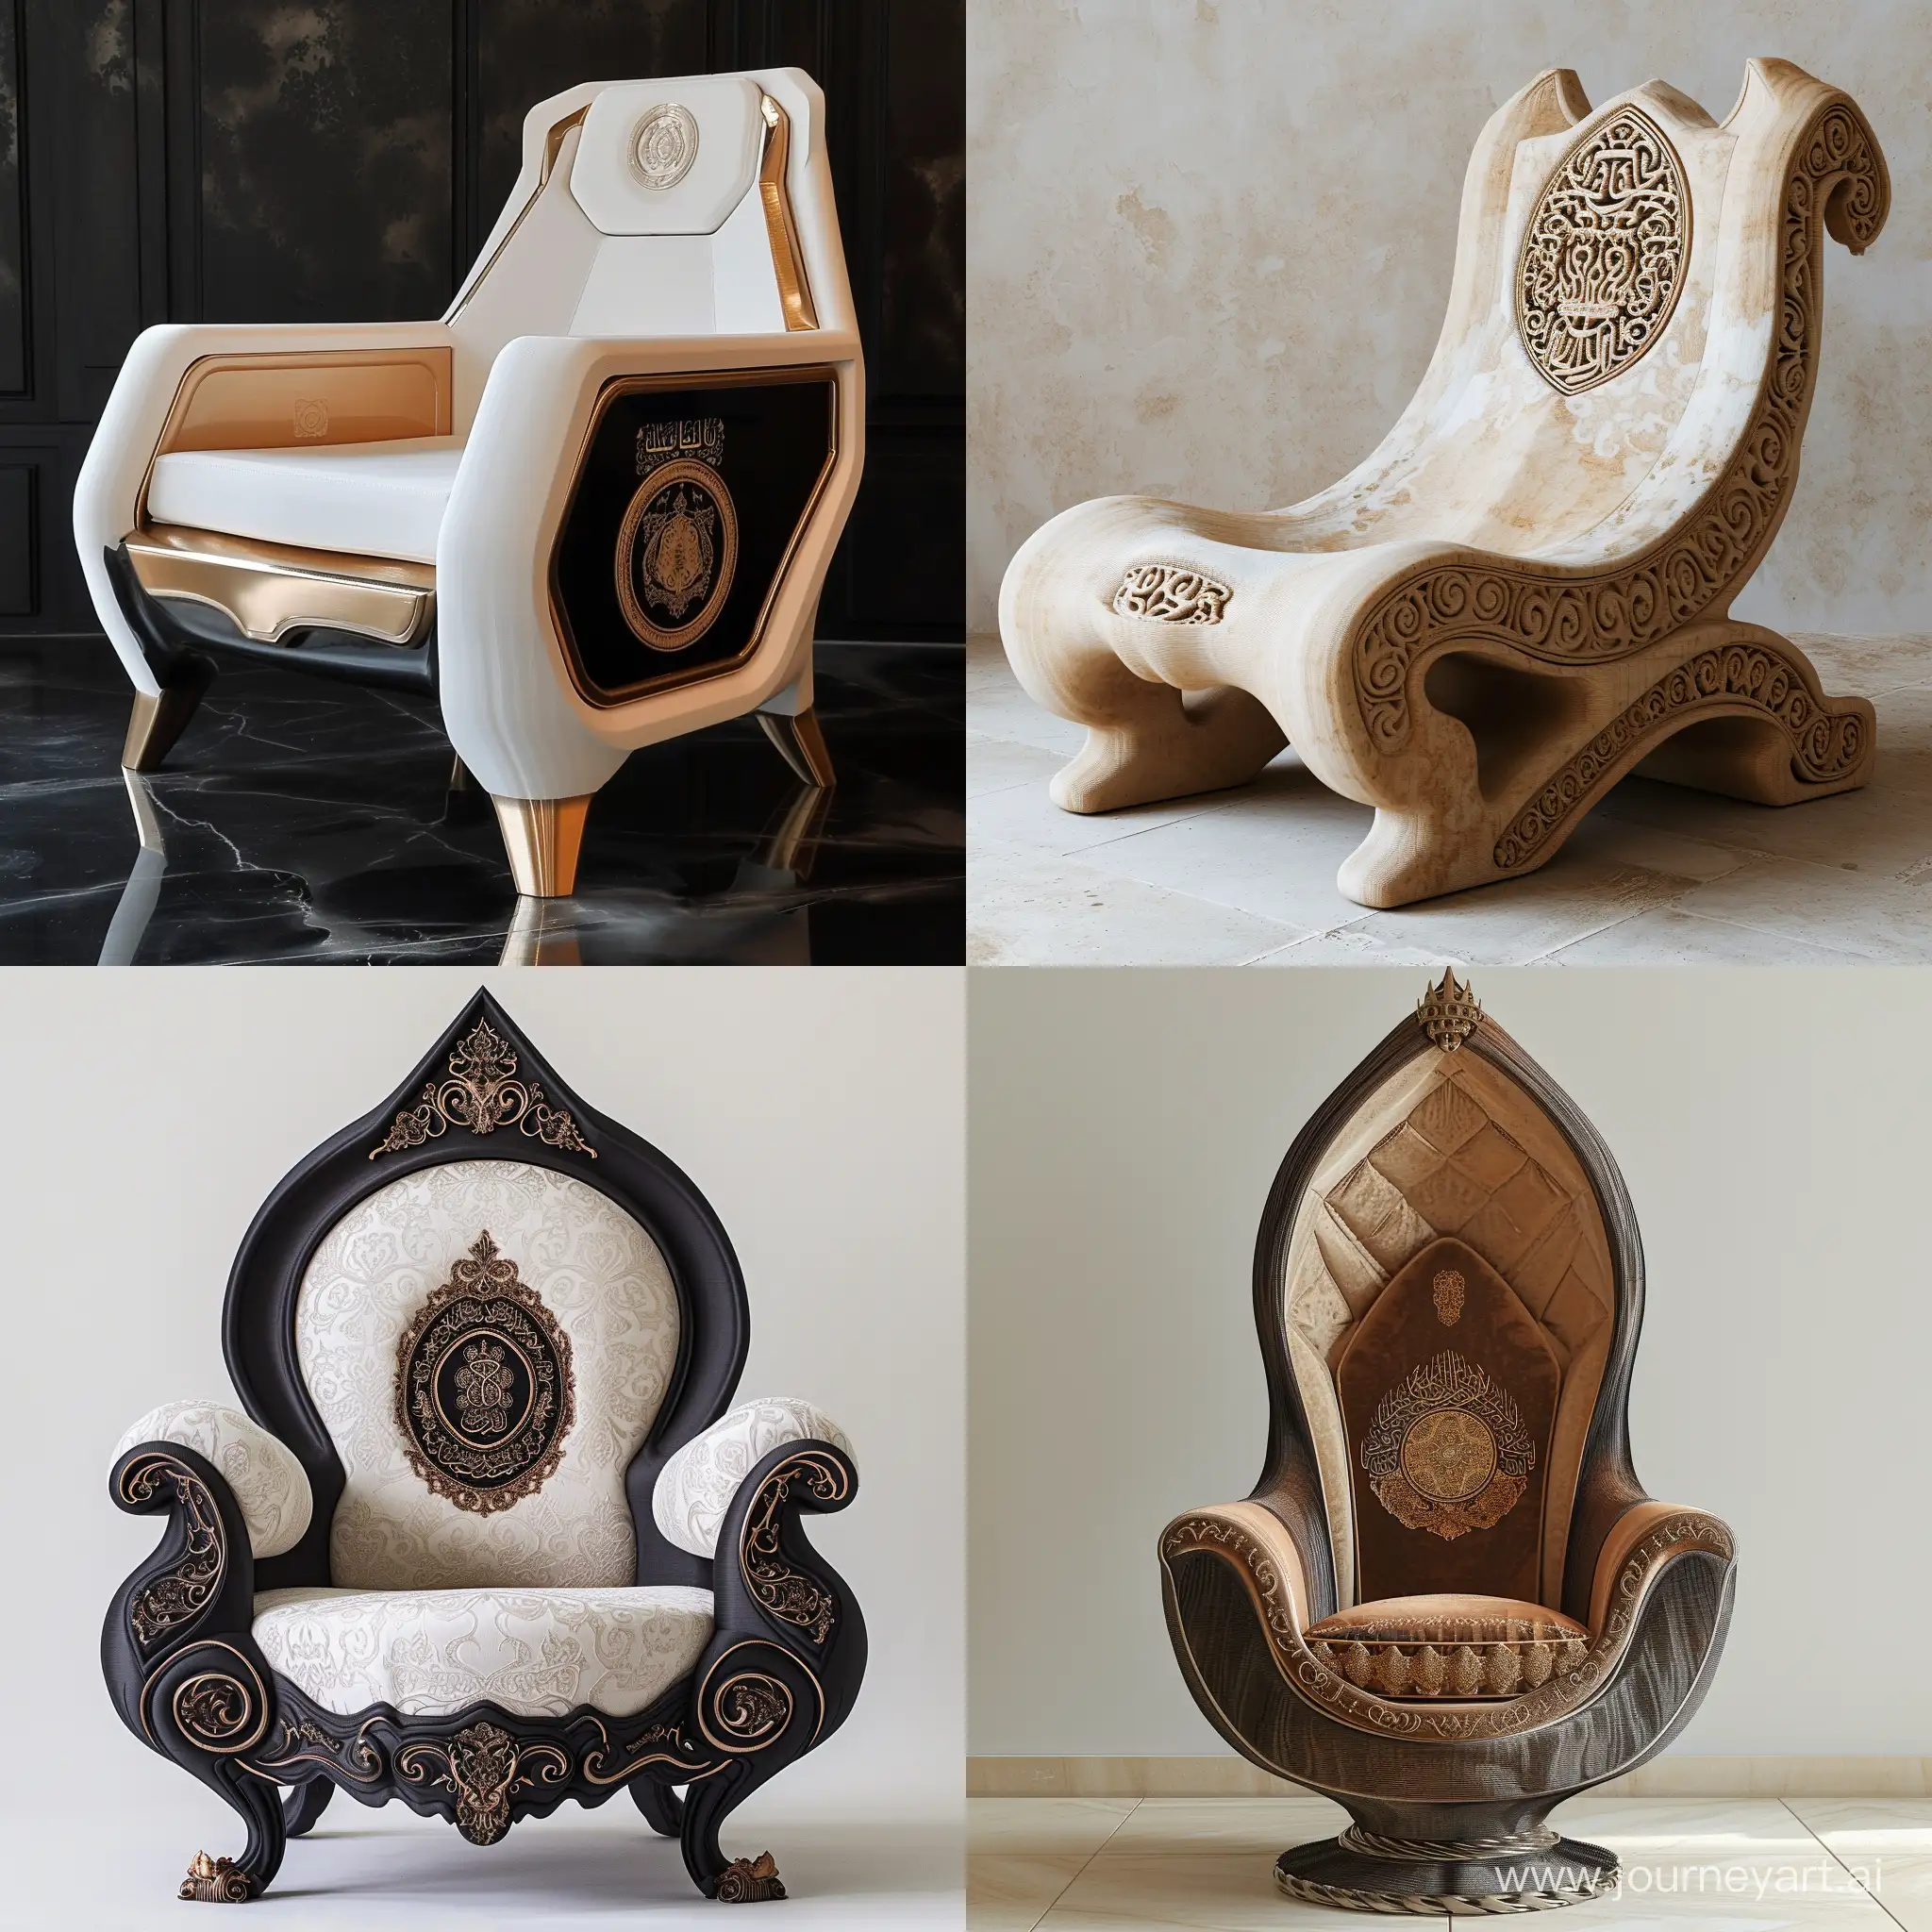 Unique-3DPrinted-Chair-with-Family-Emblem-in-Arab-Style